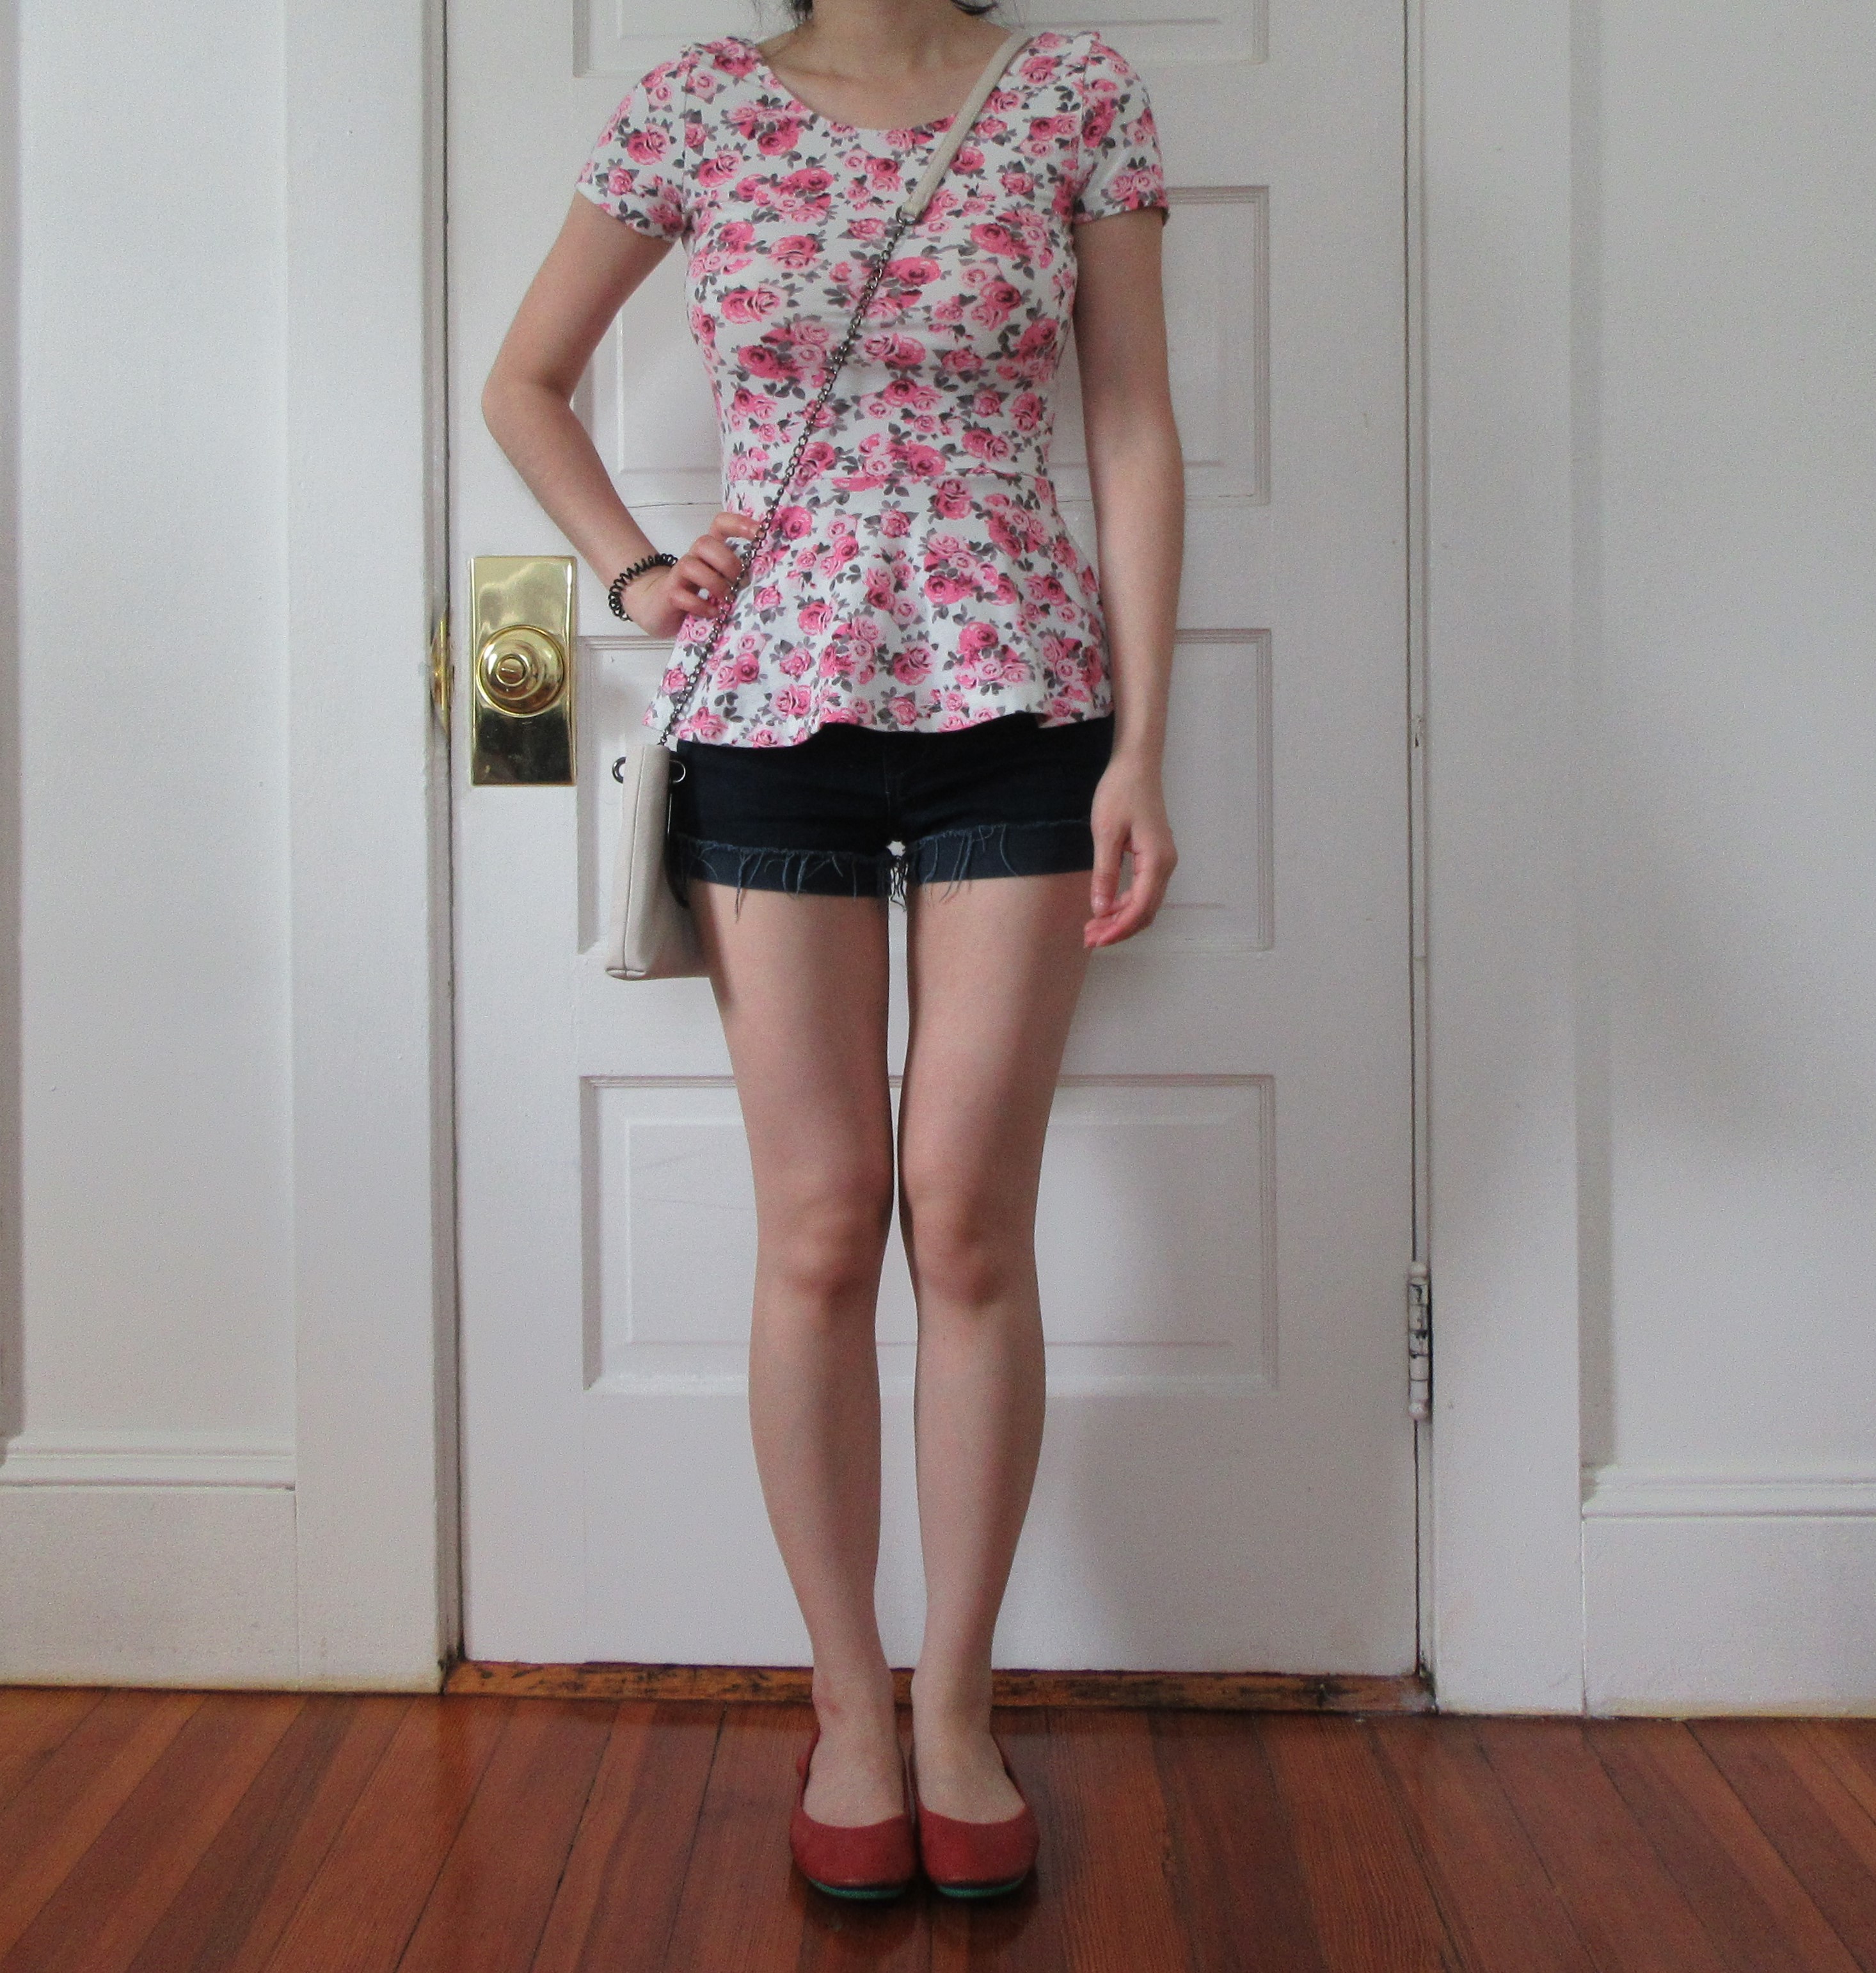 Strawberry Picking Outfit I